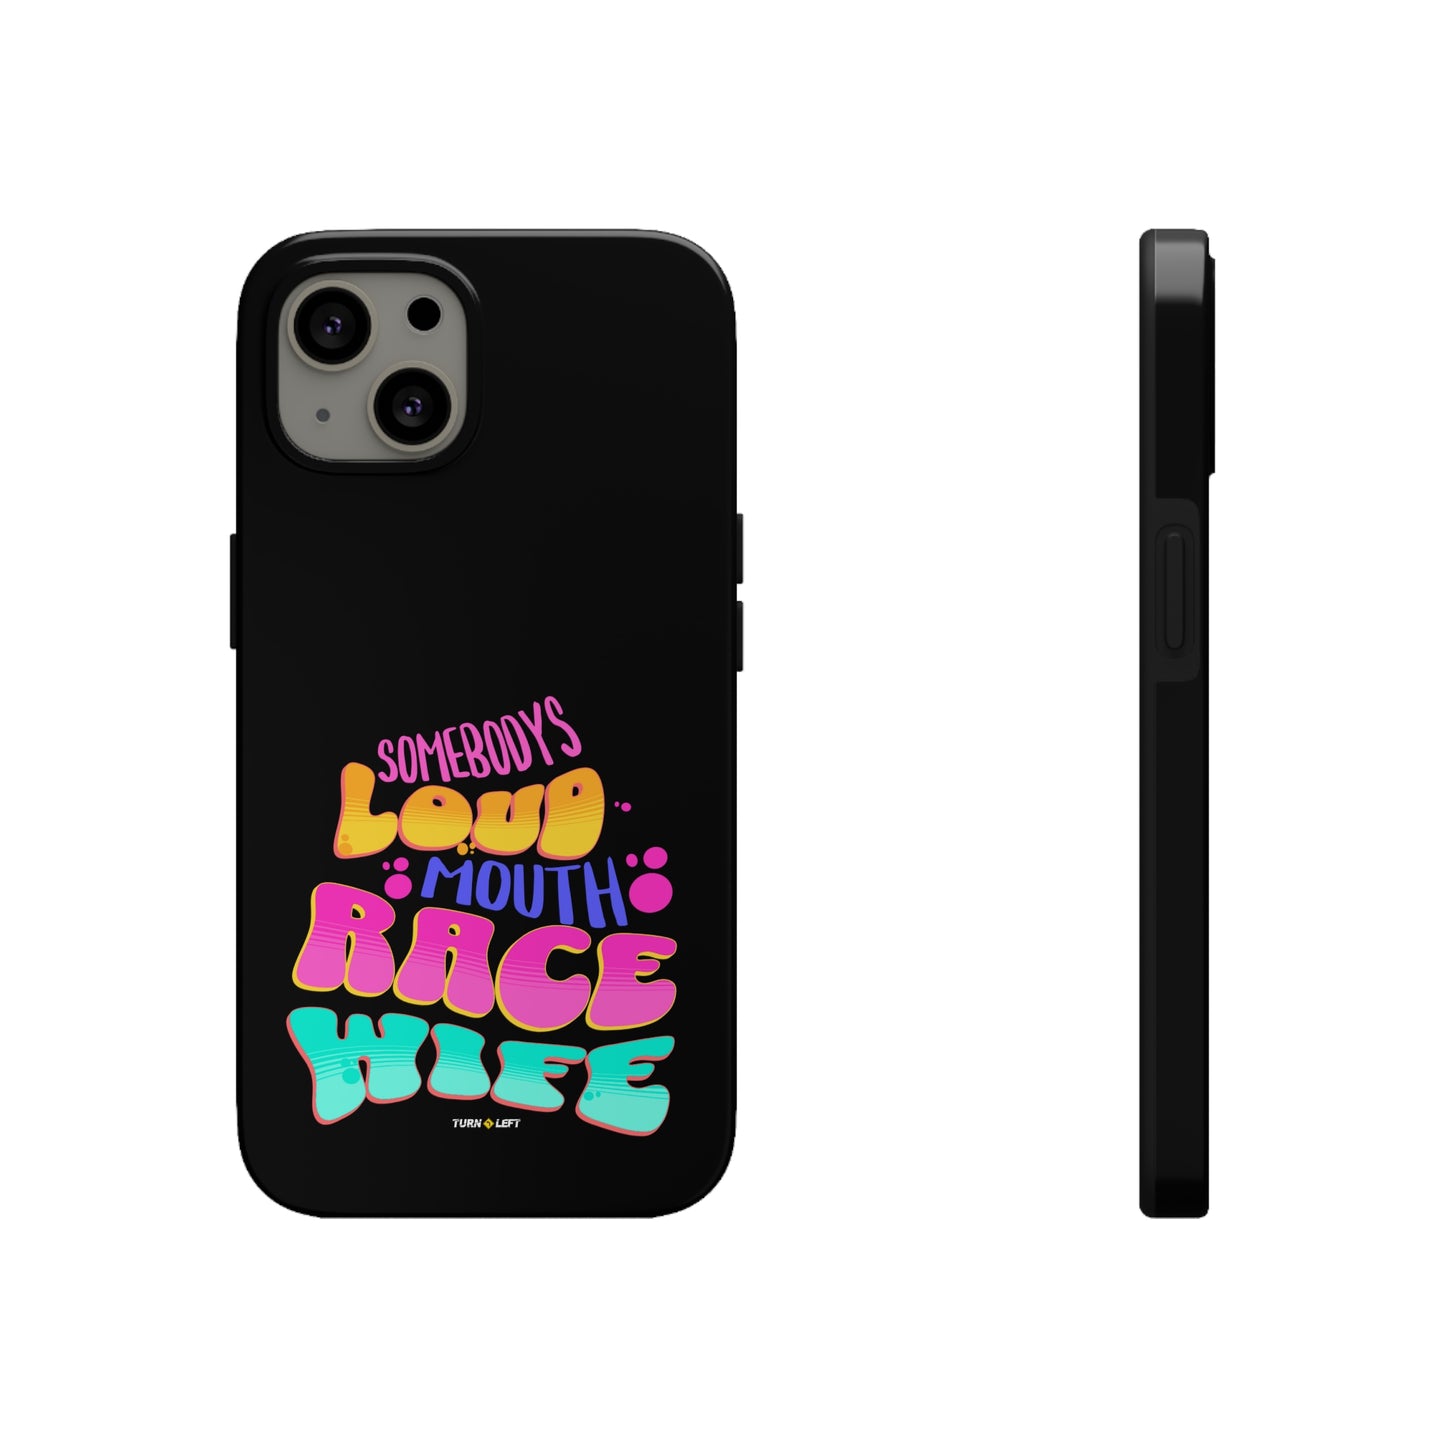 Retro Somebody's Loud Mouth Race Wife Tough Phone Cases